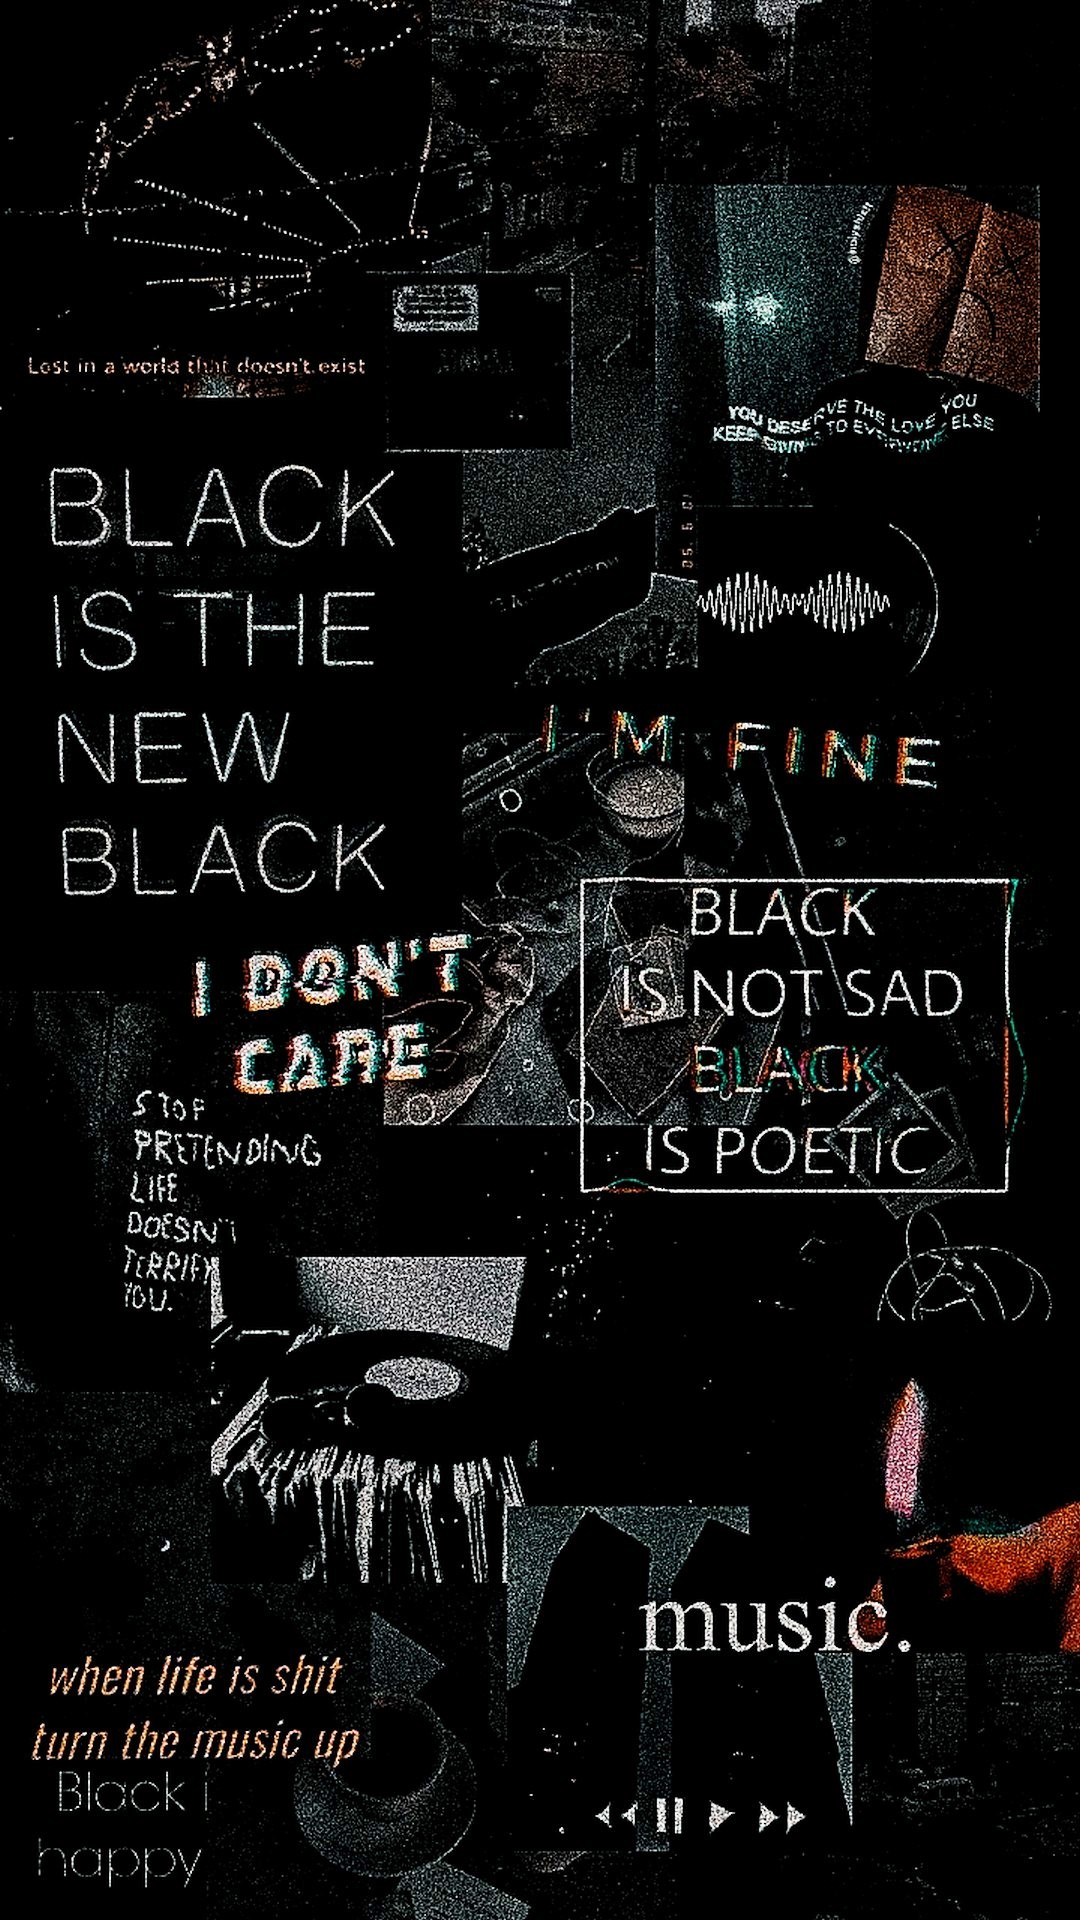 Black Aesthetic iPhone Wallpaper Lock Screen with high-resolution 1080x1920 pixel. You can set as wallpaper for Apple iPhone X, XS Max, XR, 8, 7, 6, SE, iPad. Enjoy and share your favorite HD wallpapers and background images